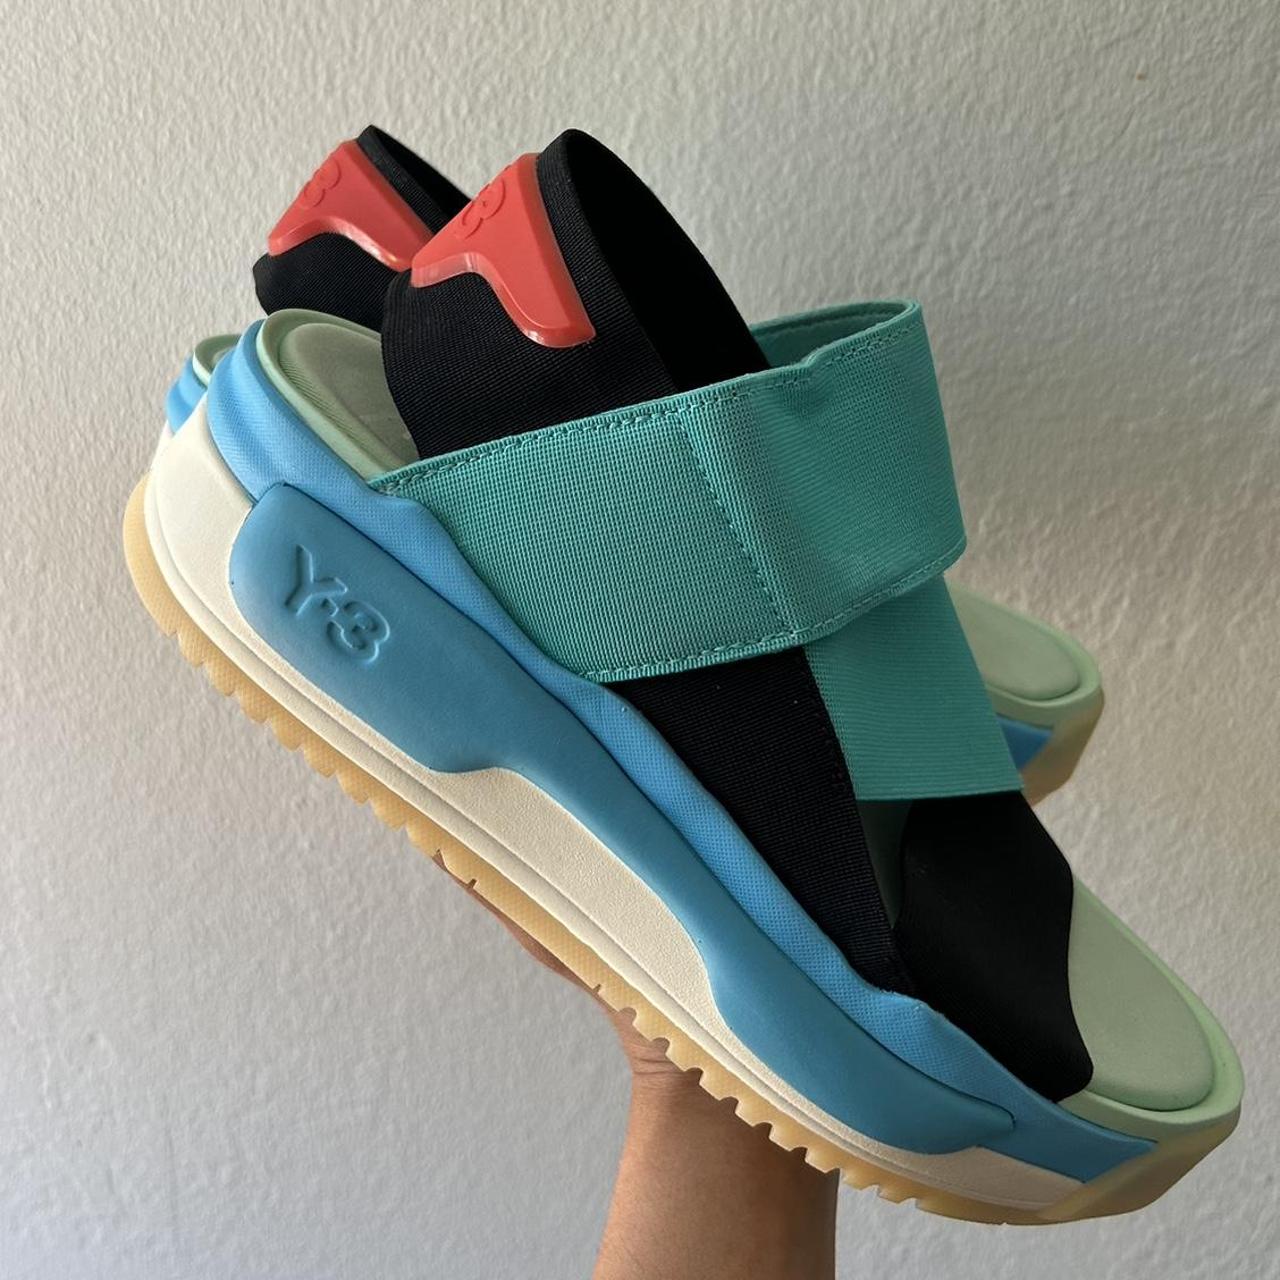 Y-3 HOKORI sandal sneakers New without box, size... - Depop